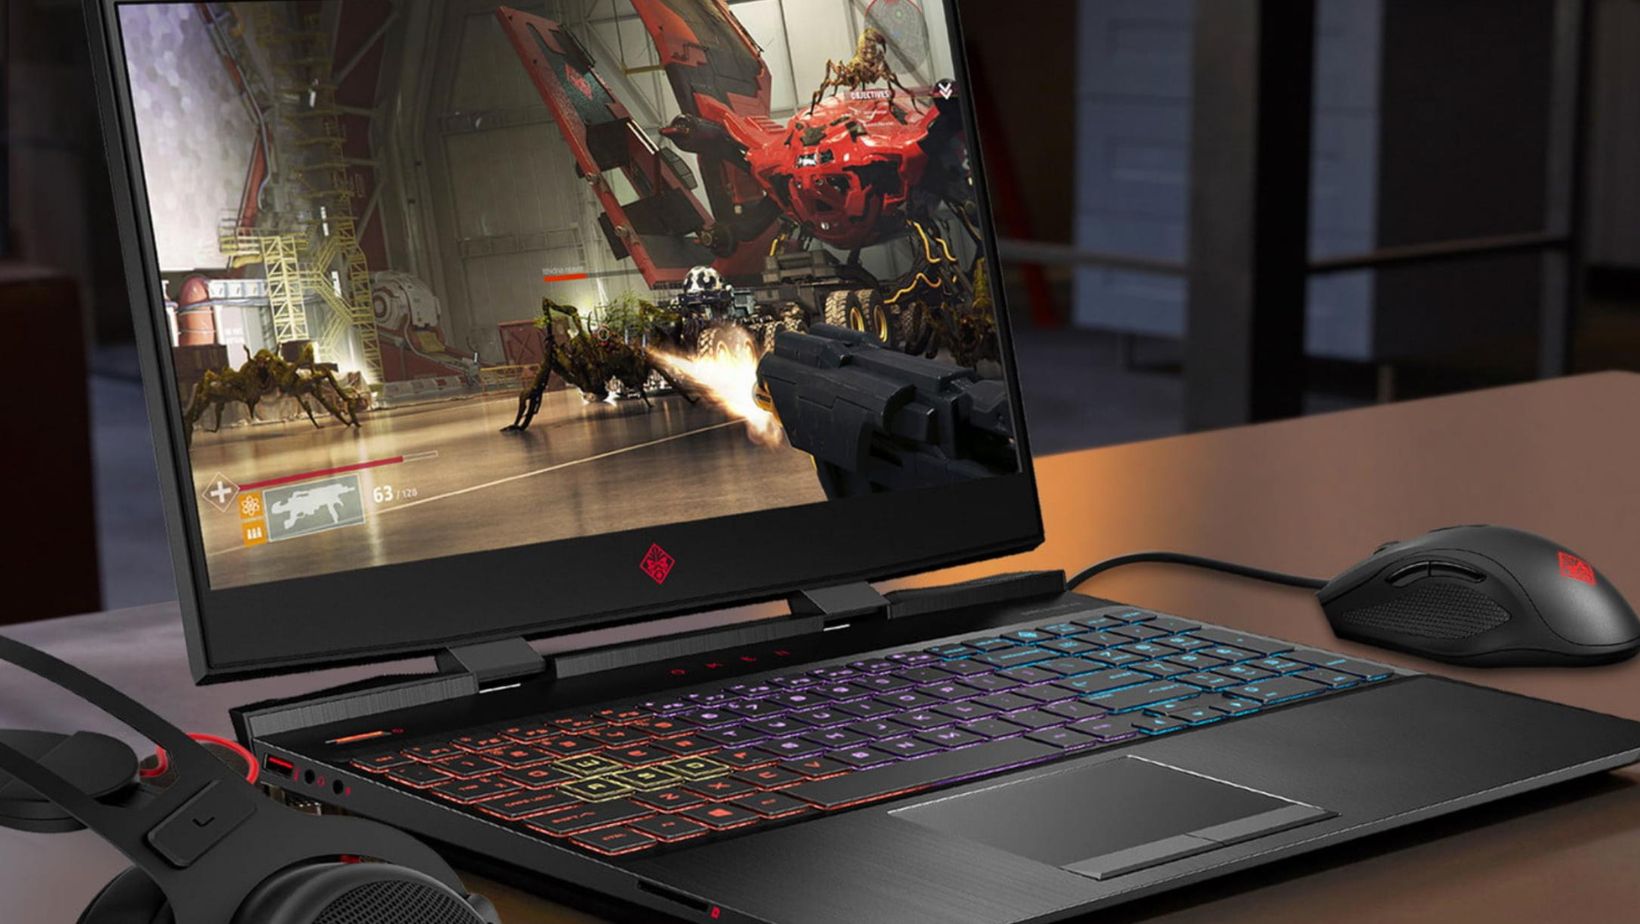 gaming laptops for 200